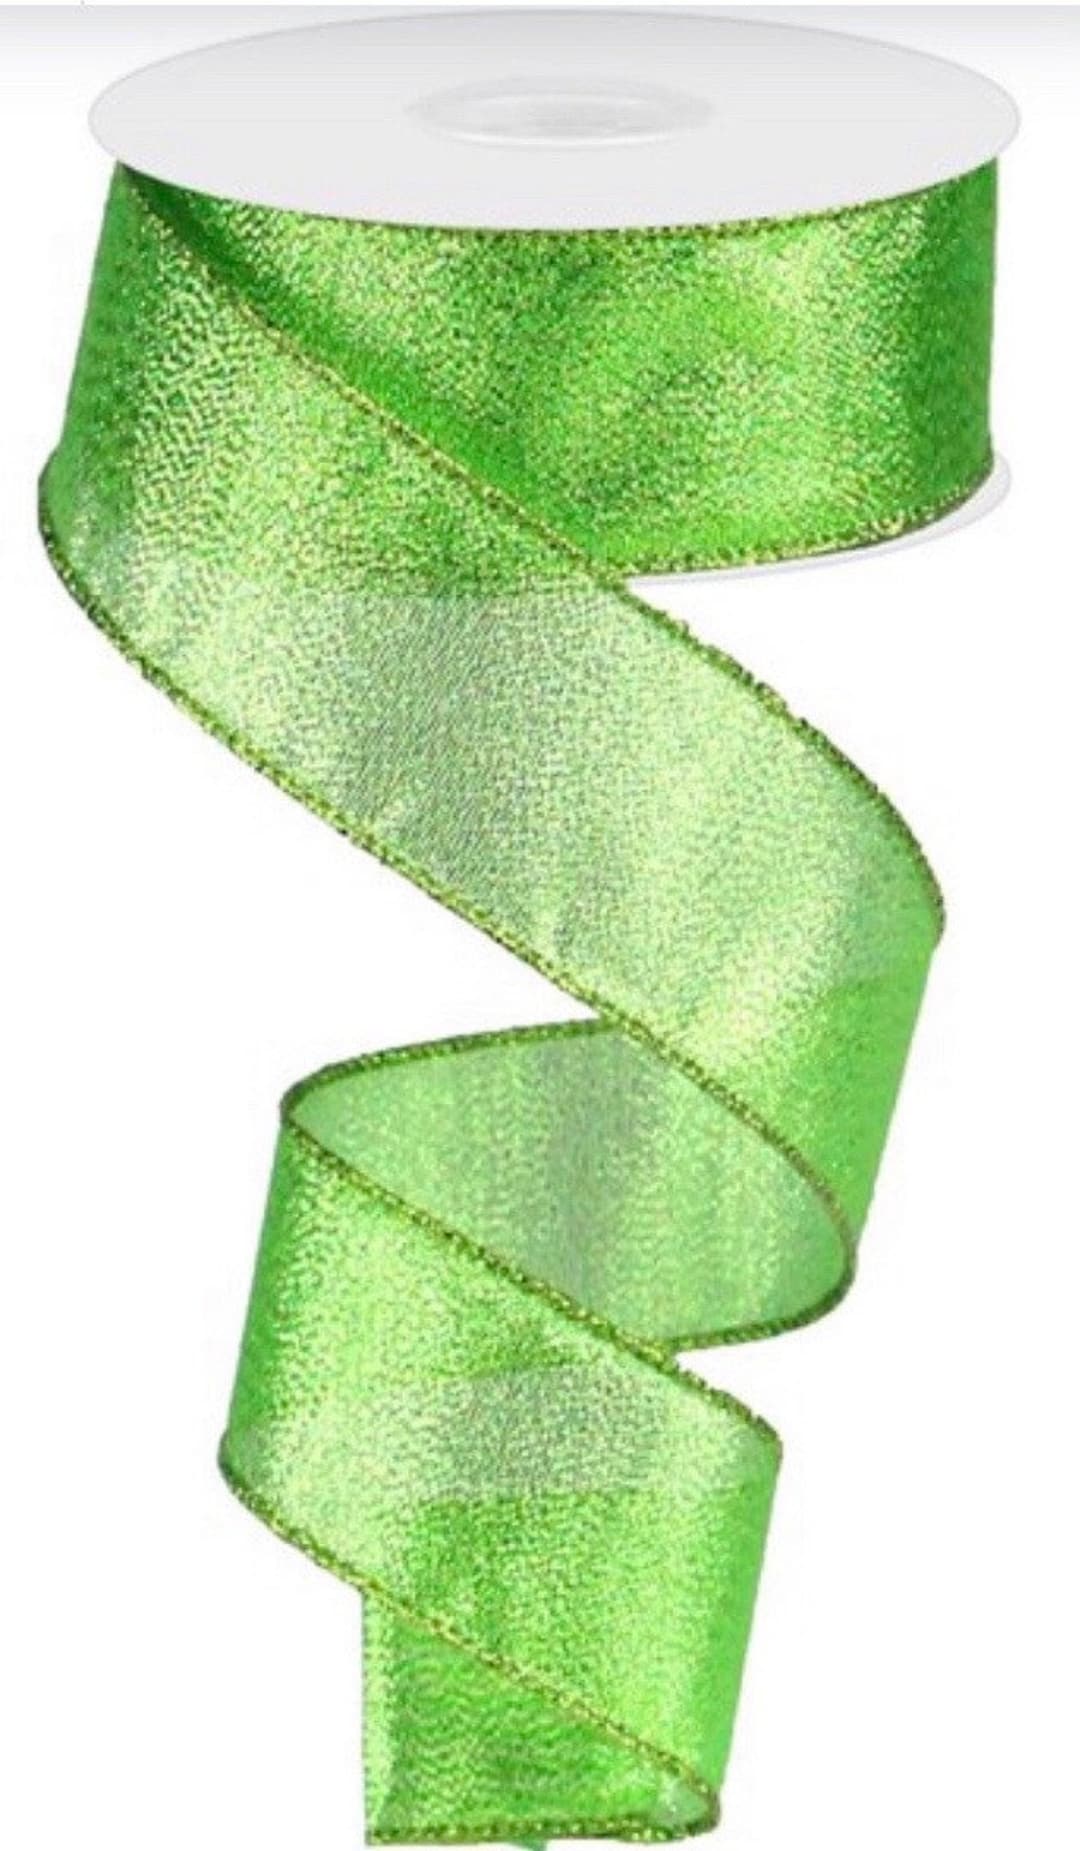 Dark Green Ribbon 1-1/2 Inch, 25 Yards Forest Green Satin Fabric Ribbons  for Christmas Gift Wrapping, Garland, Christmas Tree Ornaments, Bows  Making